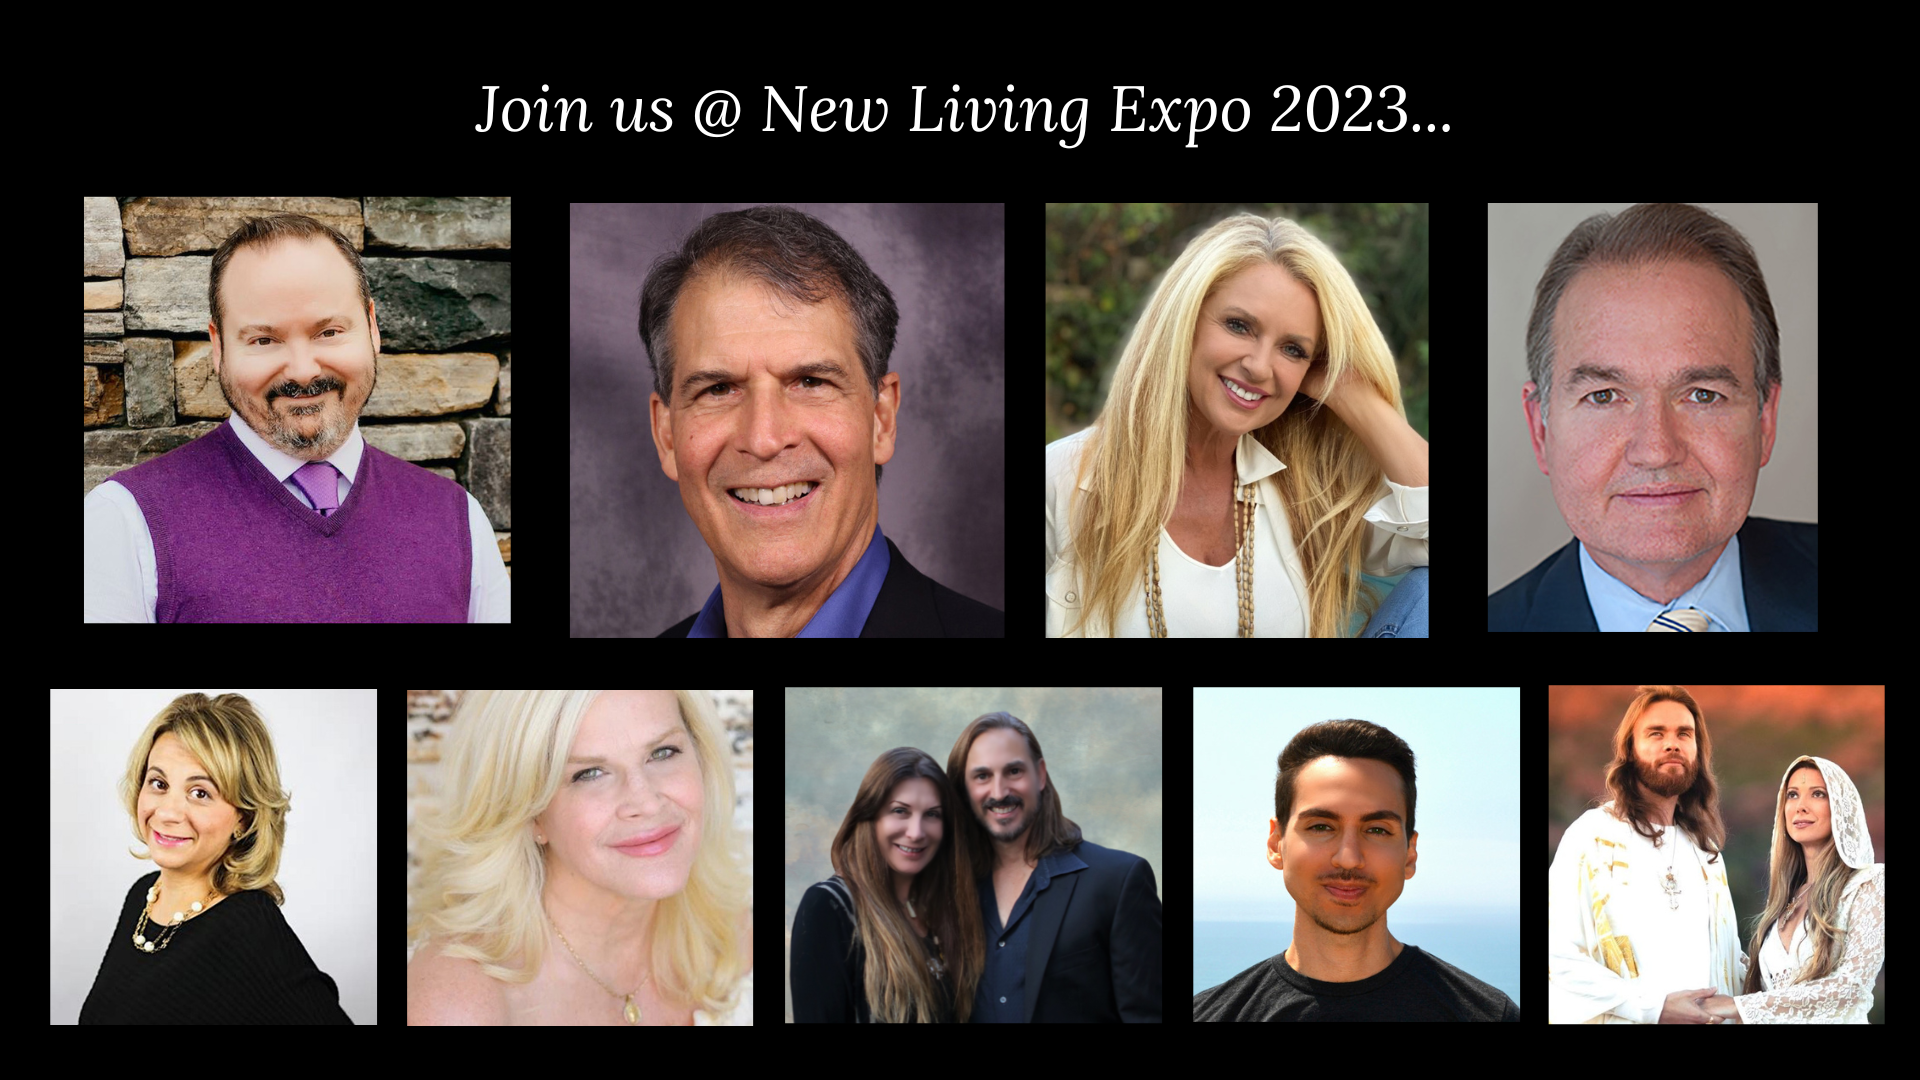 New Marin Location for New Living Expo 2023